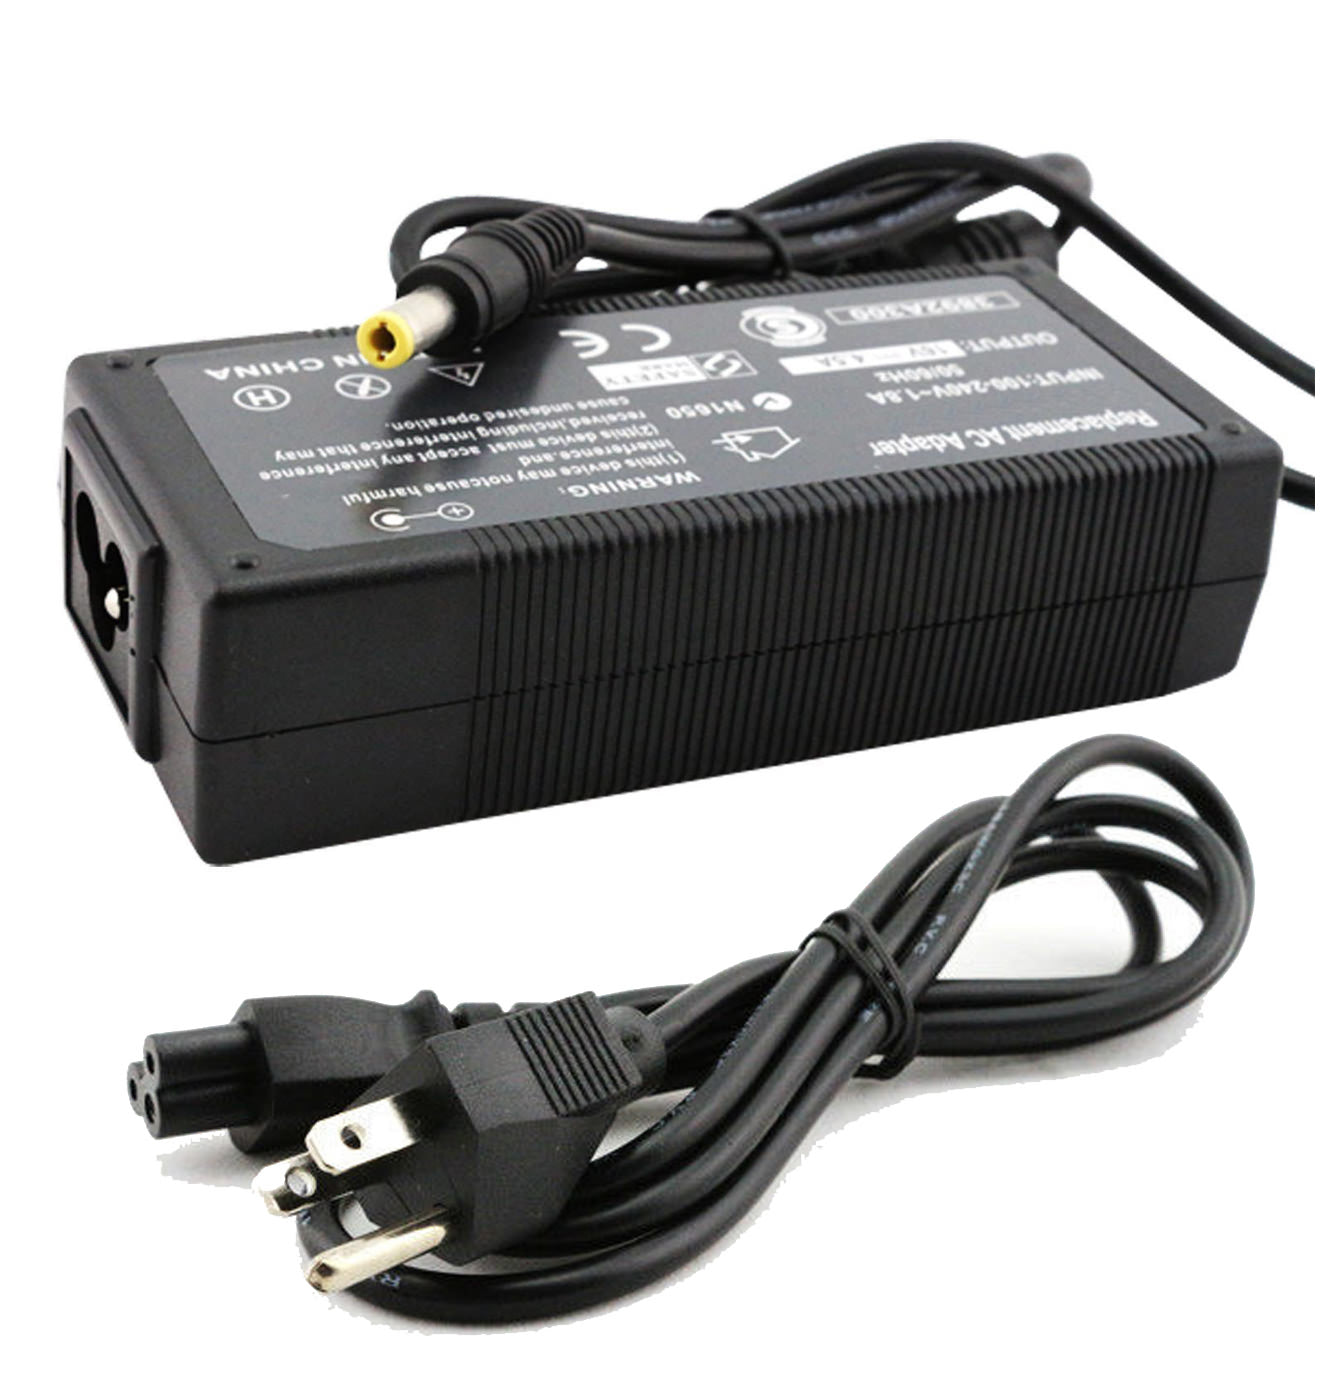 AC Adapter Charger for IBM ThinkPad R32 Notebook.